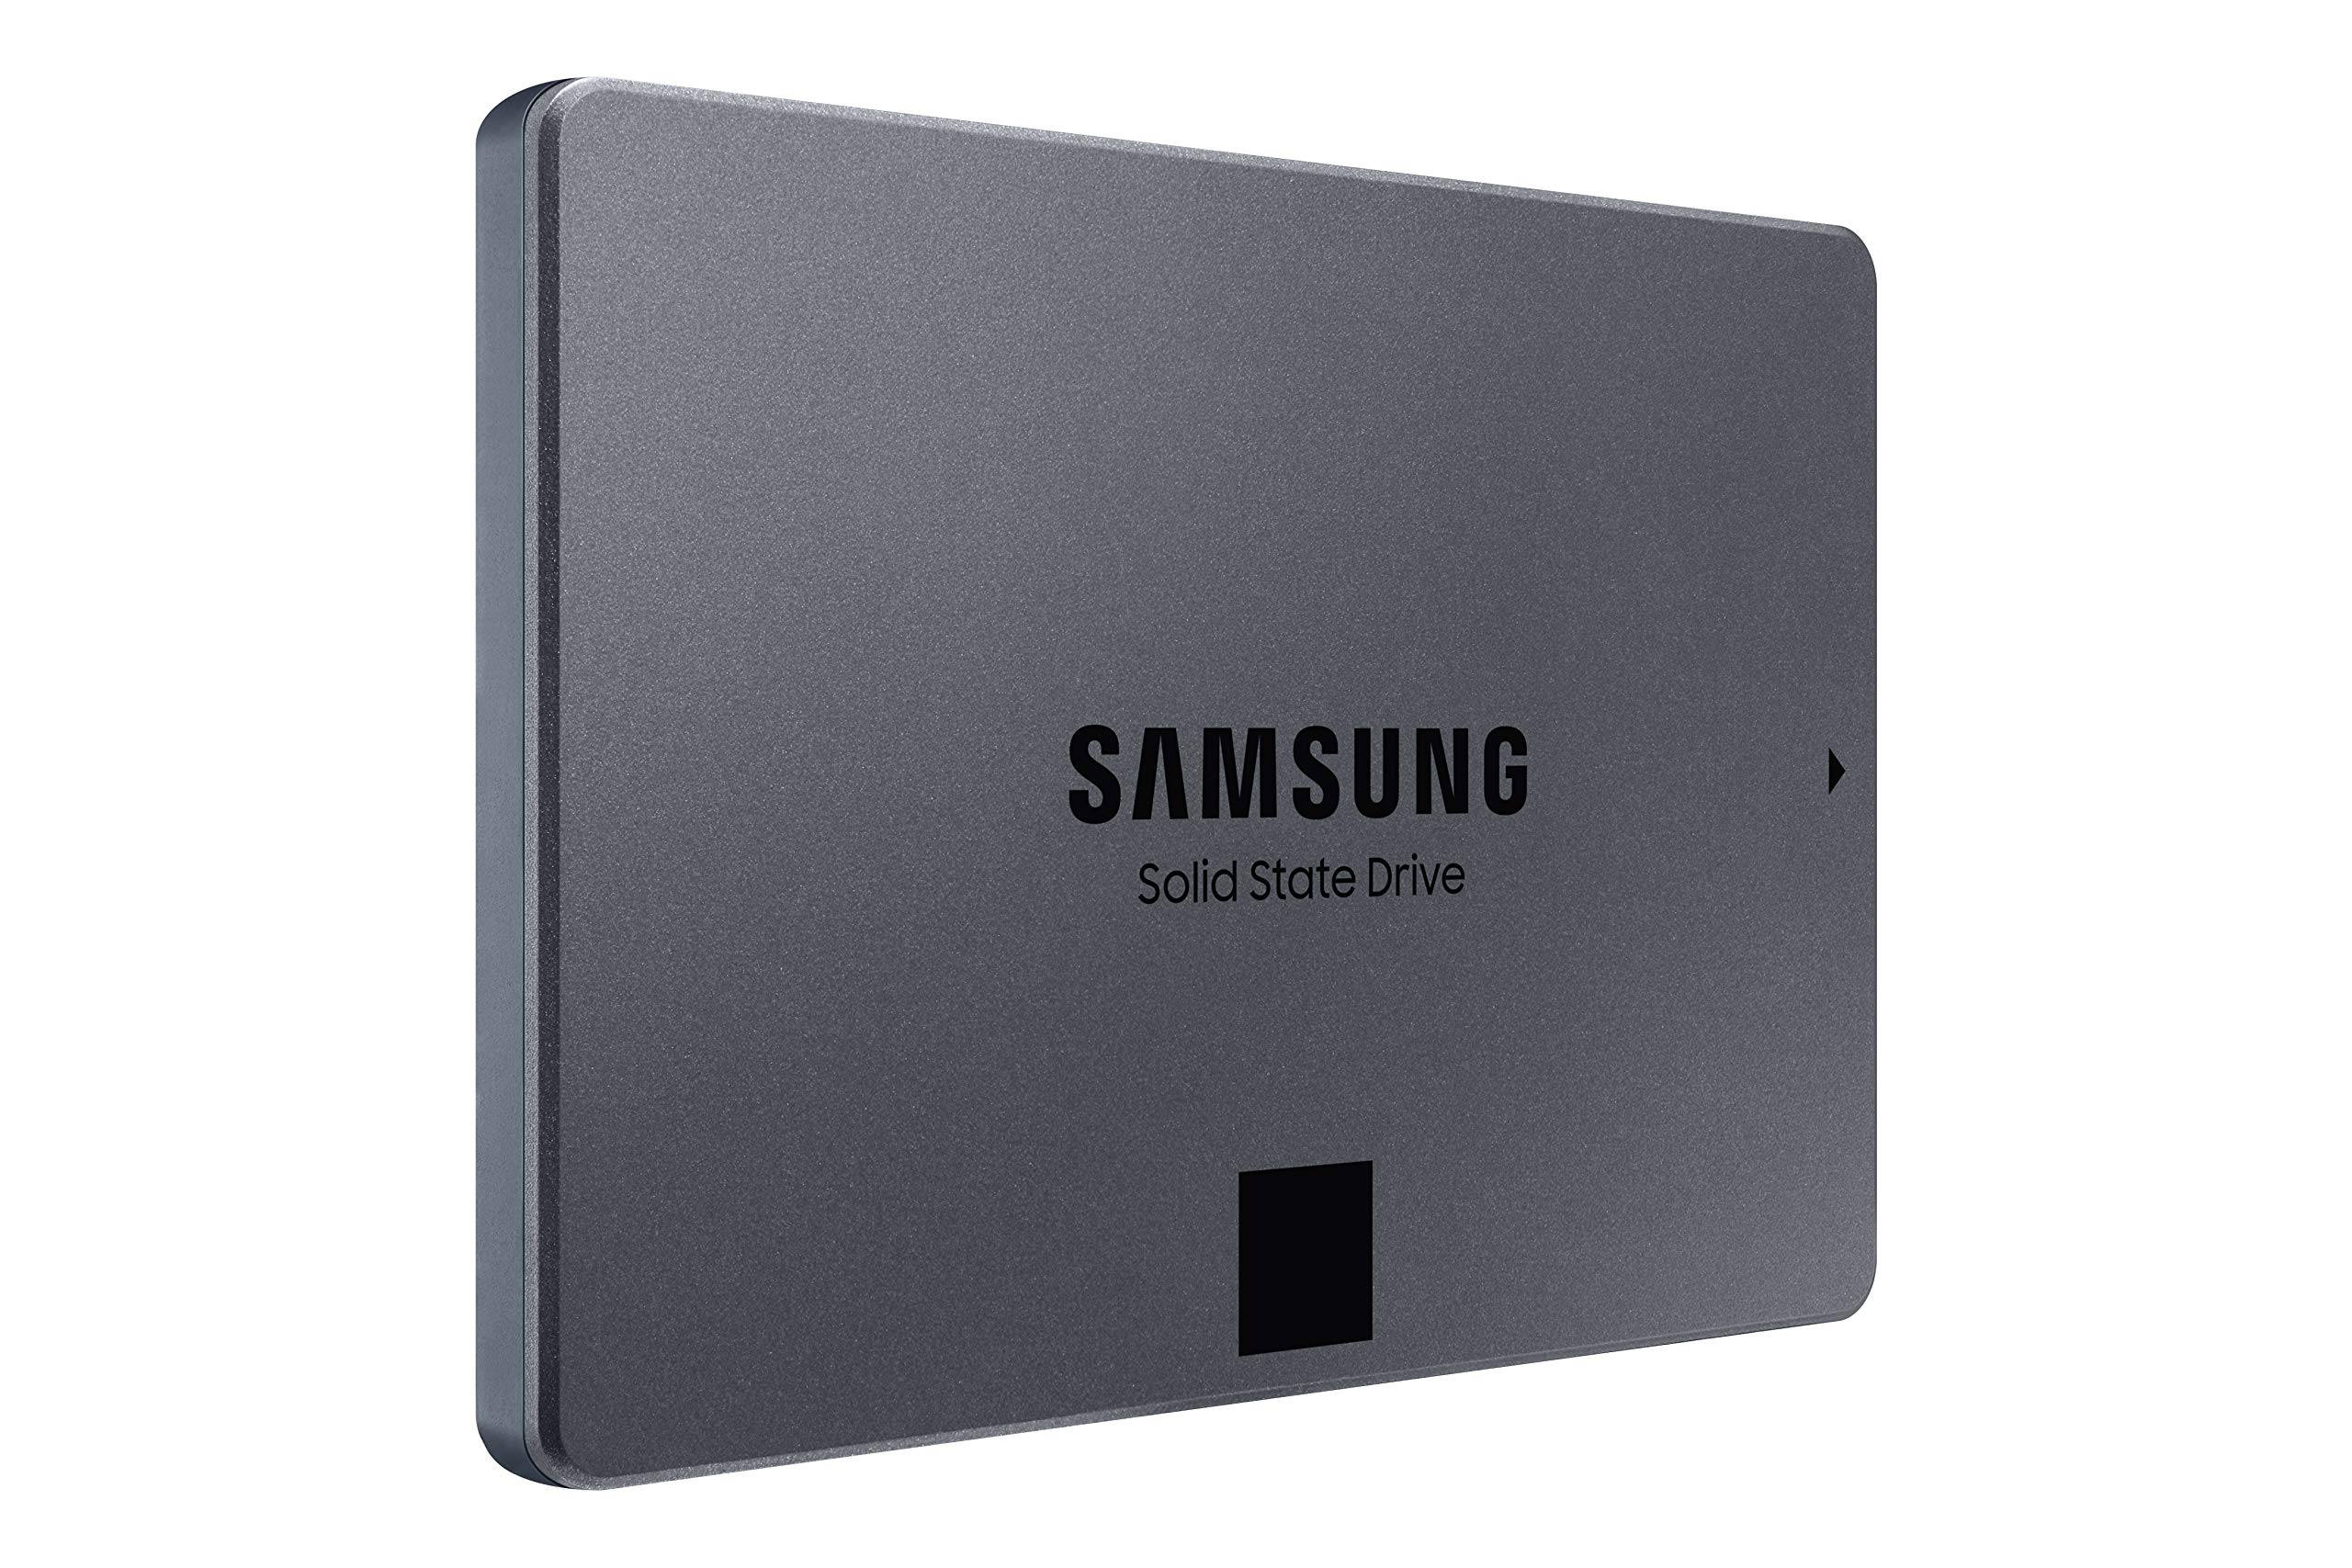 SAMSUNG 860 QVO 1TB Solid State Drive (MZ-76Q1T0B/AM) V-NAND, SATA 6Gb/s, Quality and Value Optimized SSD